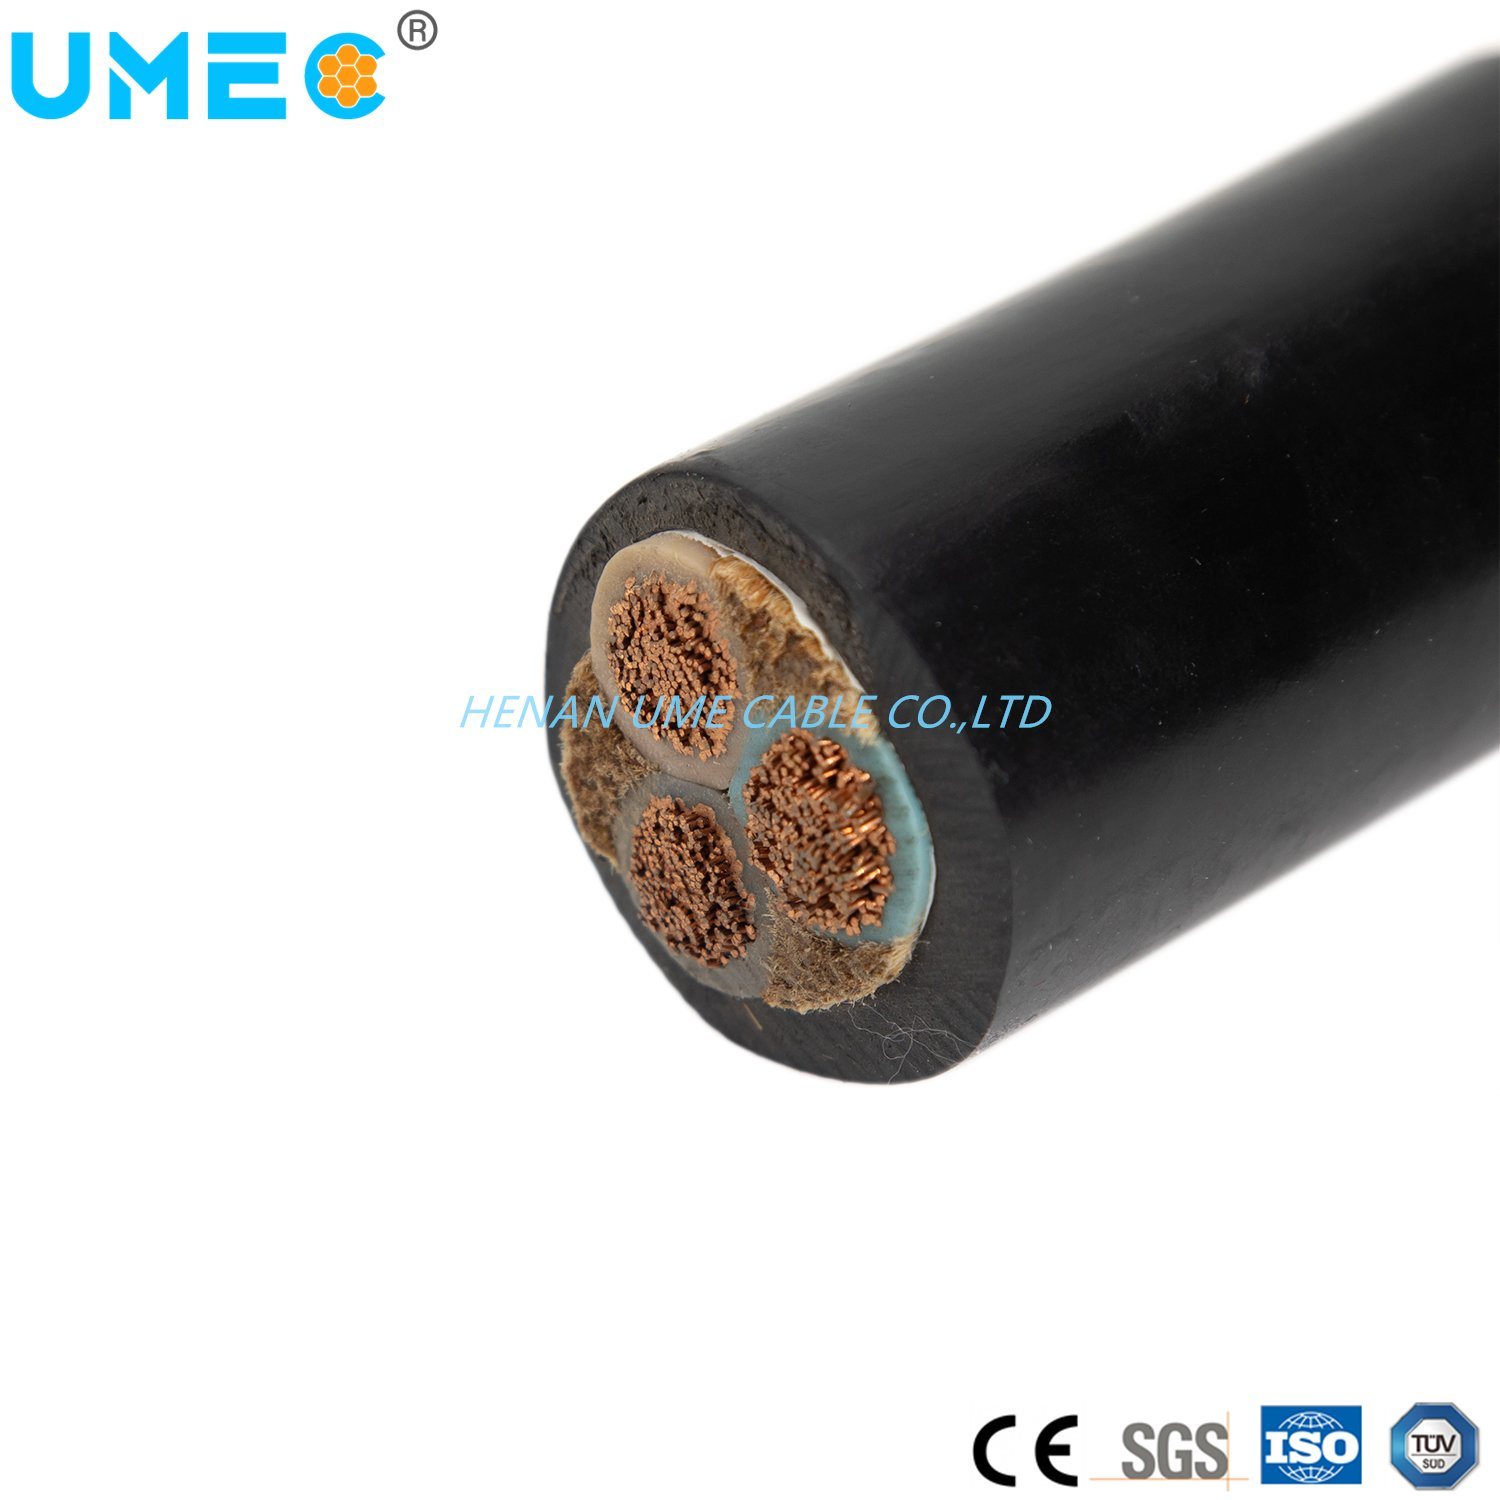 Made in China Factory Direct LV Rubber Insulated Rubber Sheathed Cable